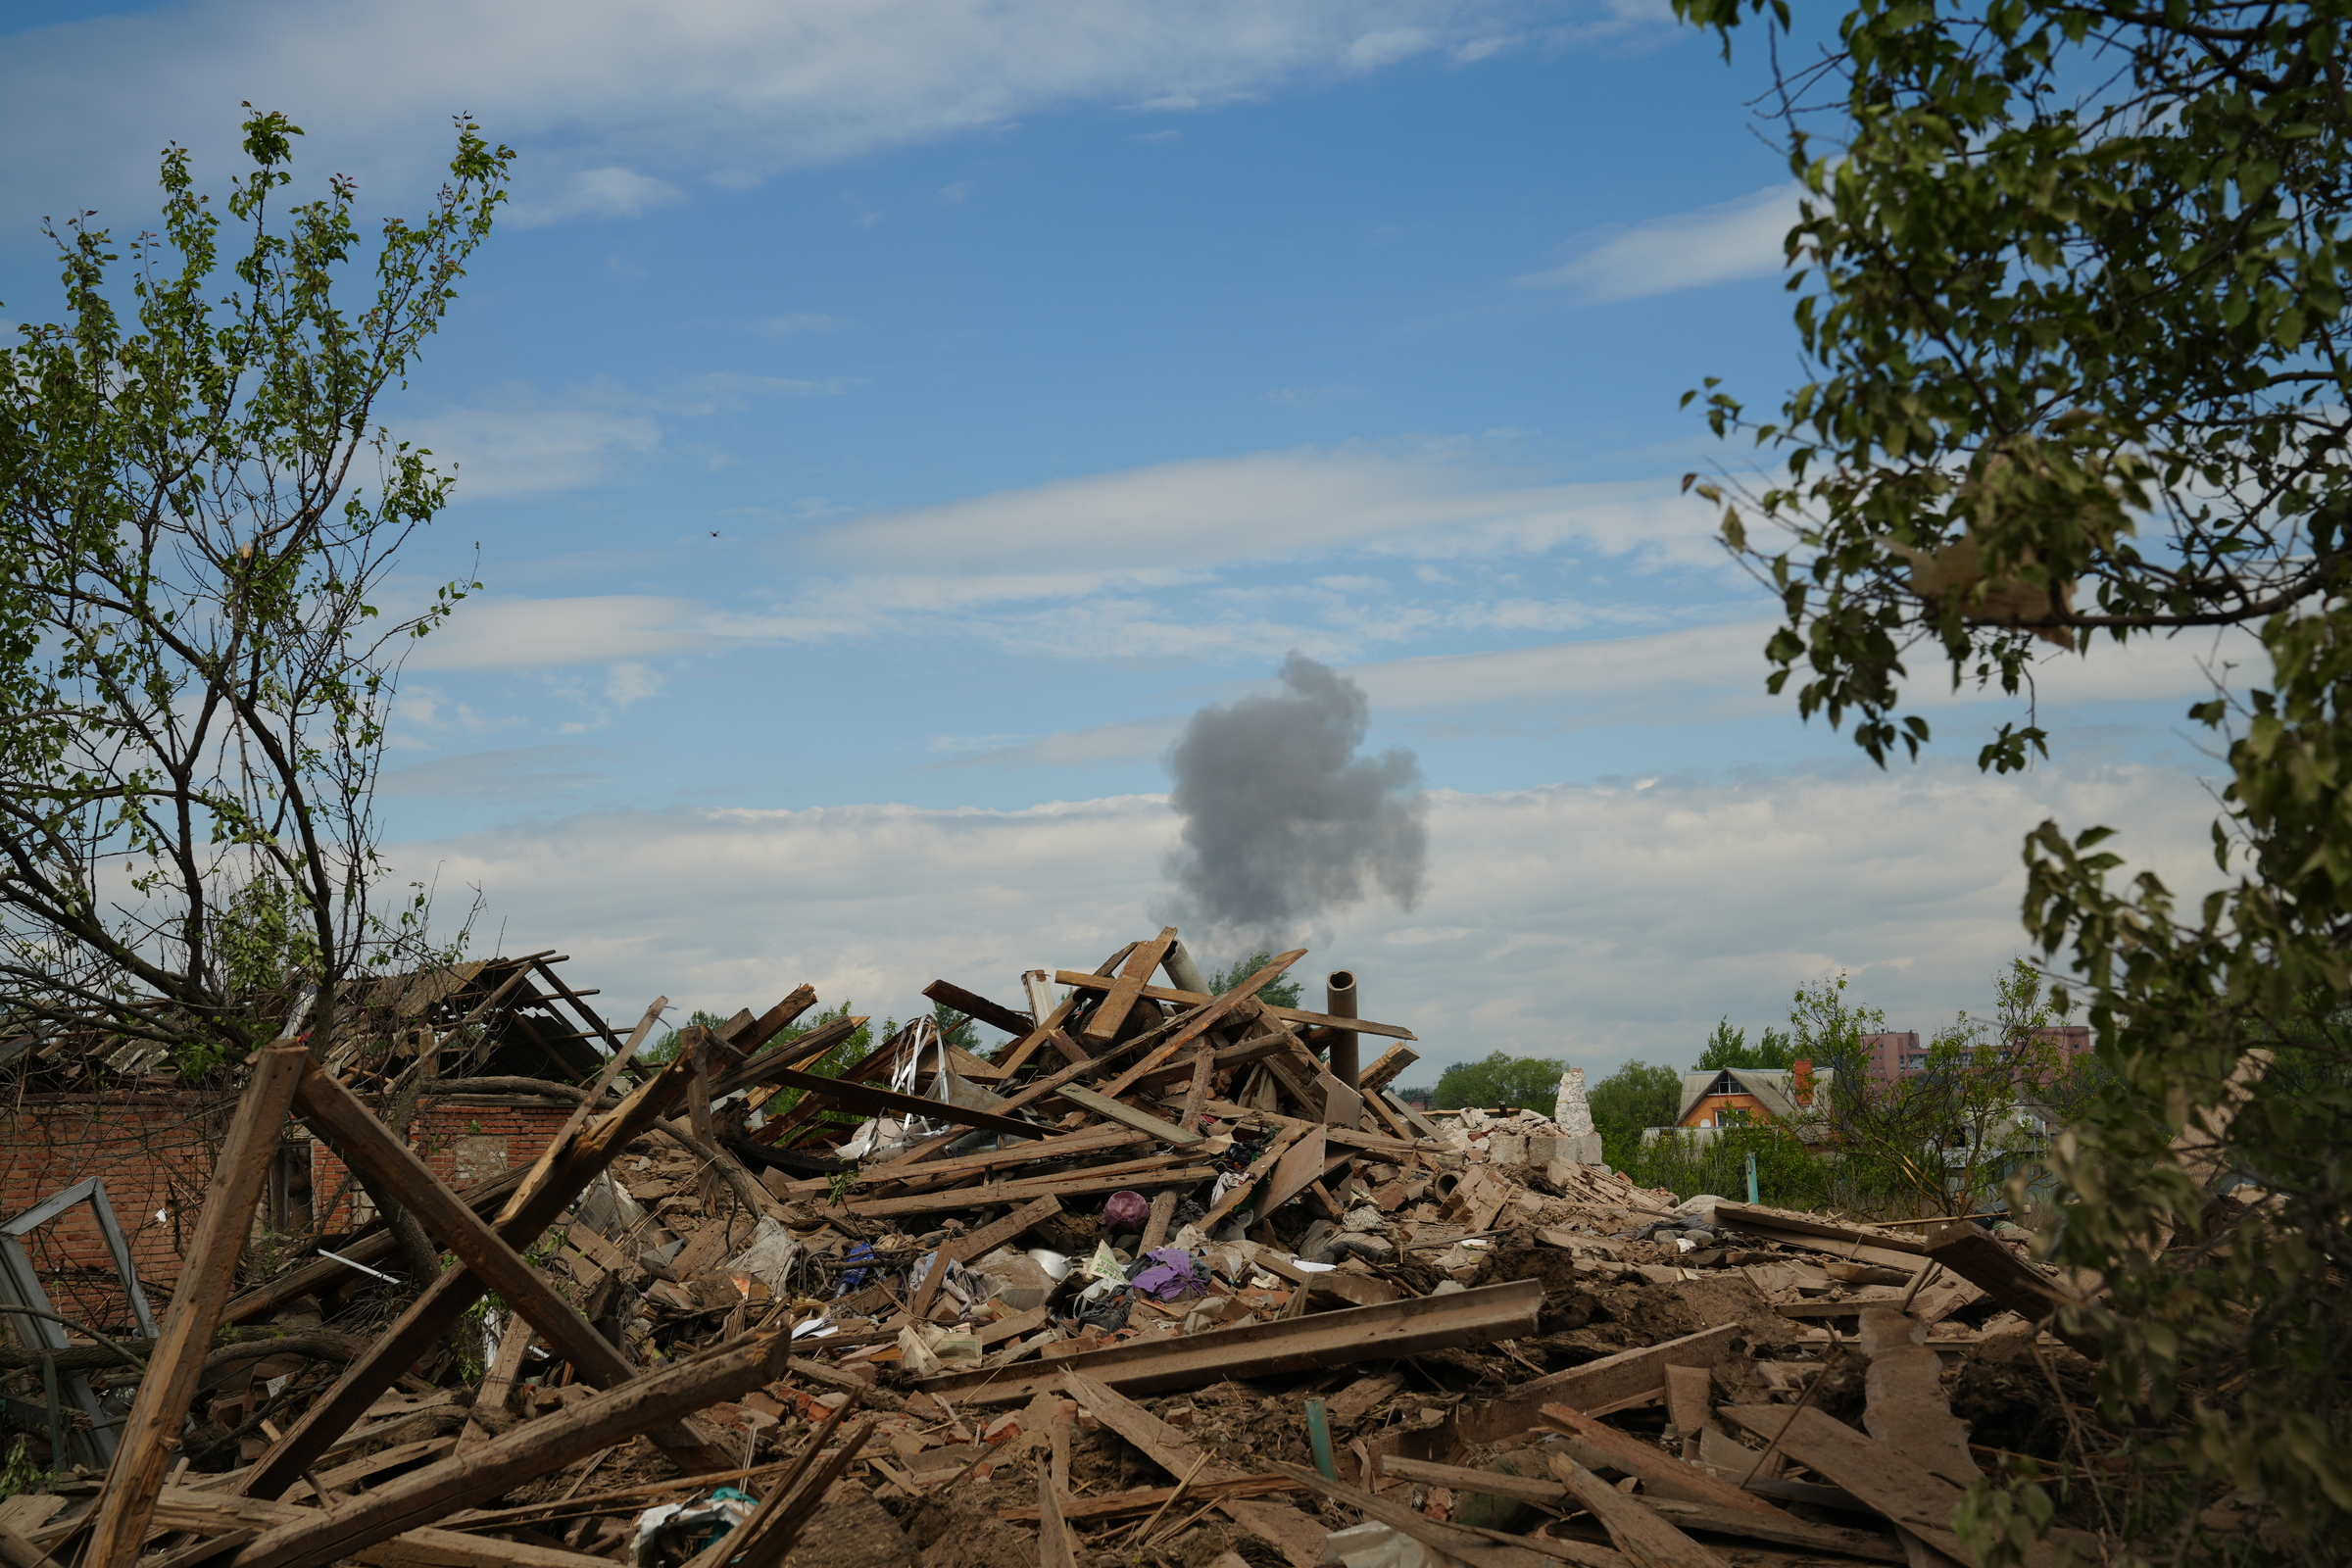 Smoke rising to the sky after the glide bomb's impact in Vovchansk, May 11, 2024 / Photo: Yana Sliemzina for Gwara Media